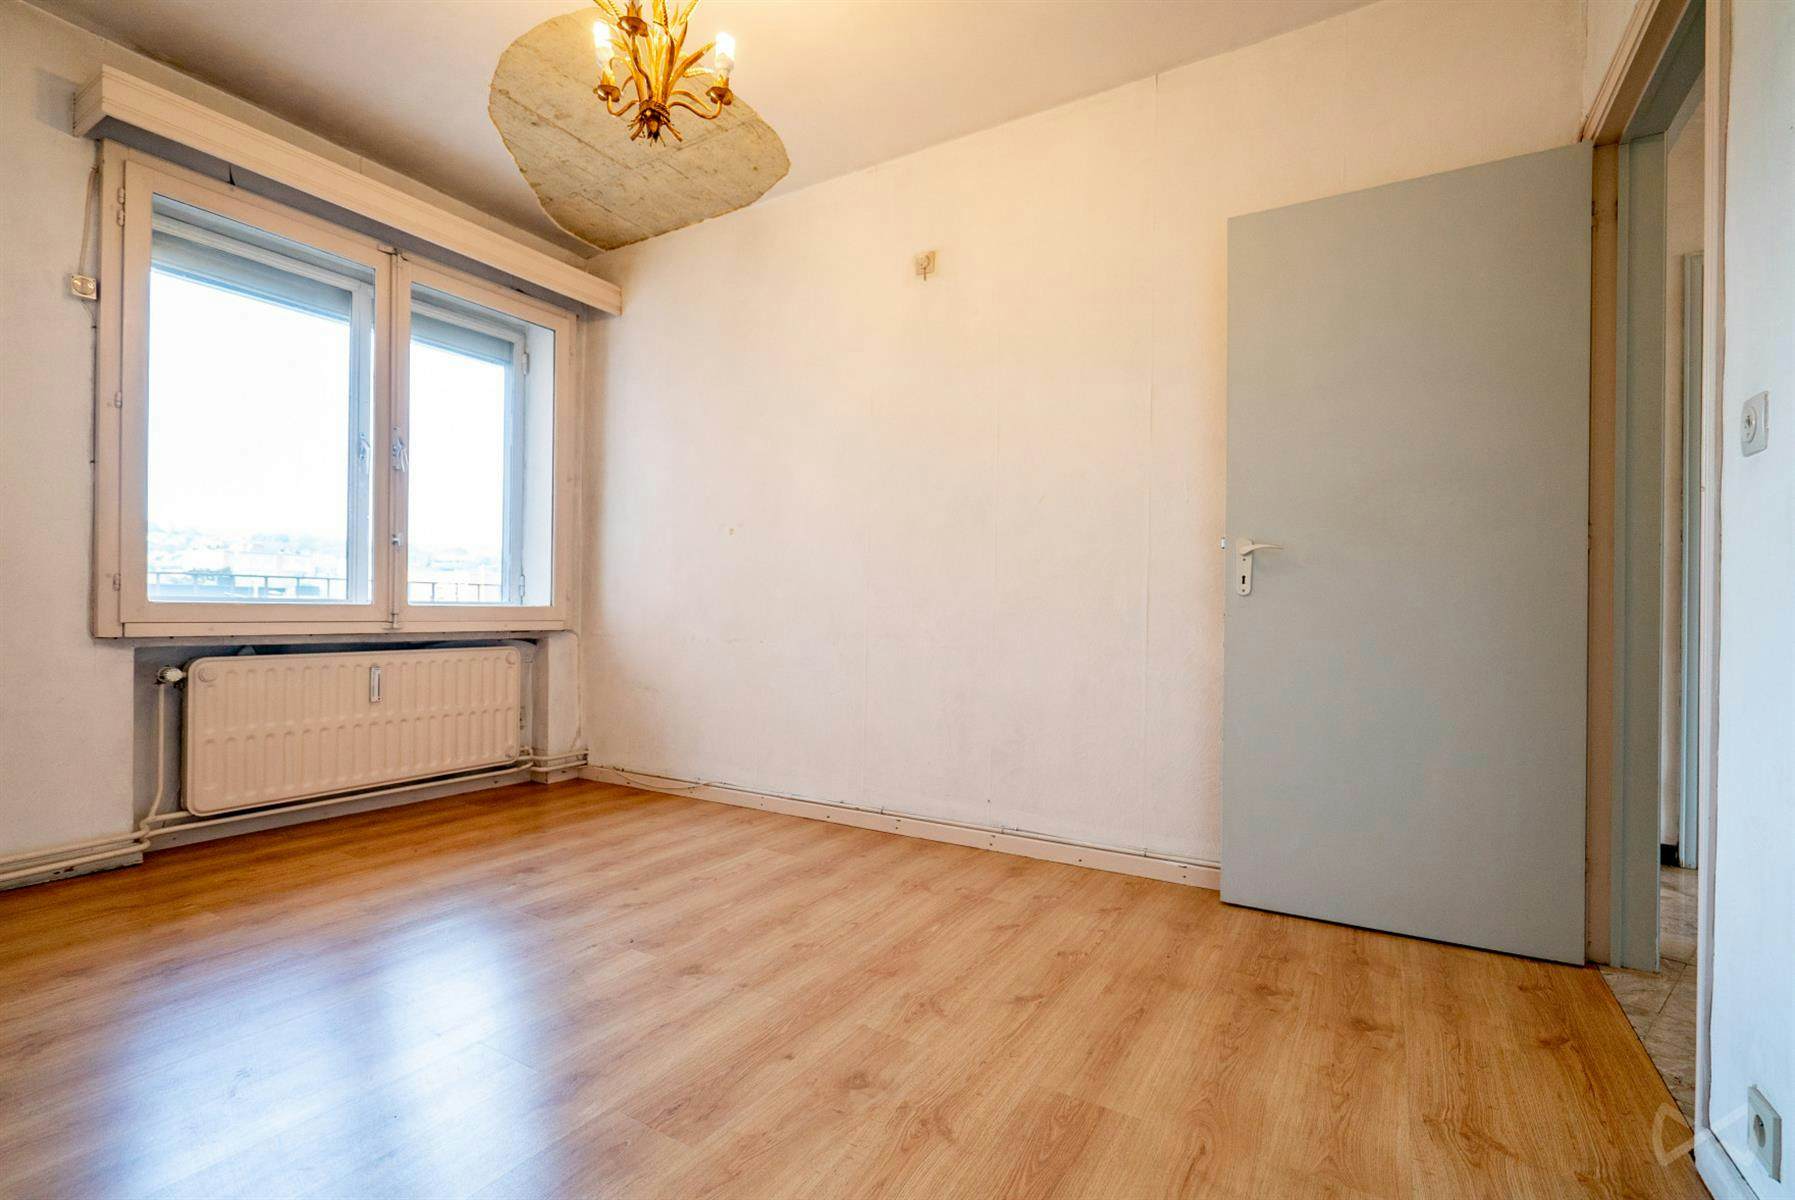 Picture 2 of 4 for Flat with two bedrooms in Liège